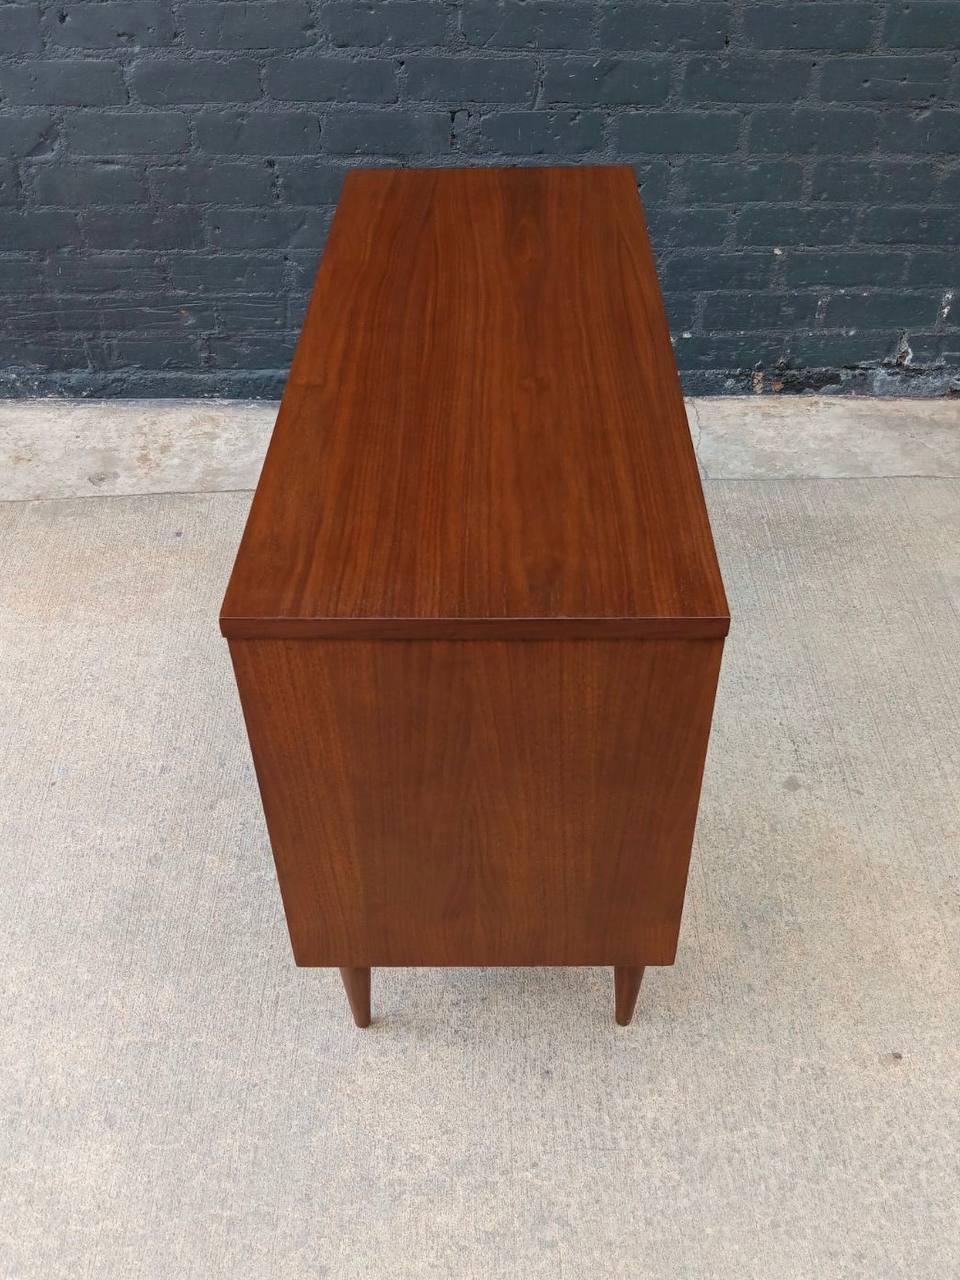 Newly Refinished - Mid-Century Modern Walnut Writing Desk by Harmony House In Excellent Condition For Sale In Los Angeles, CA